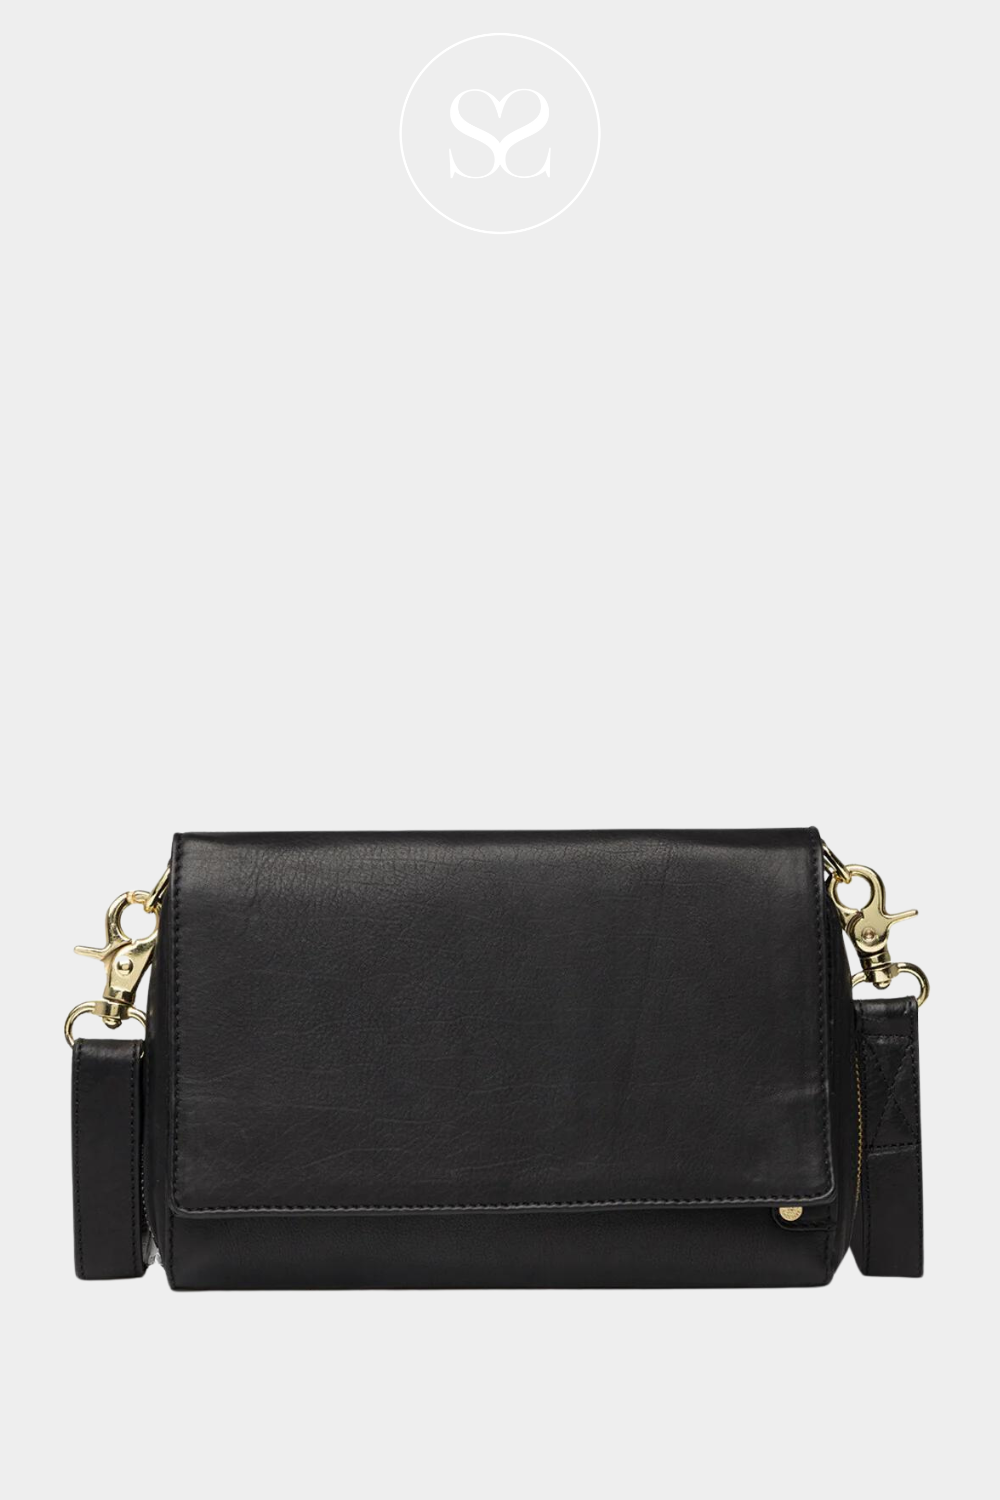 Depeche black leather crossbody bag with gold details